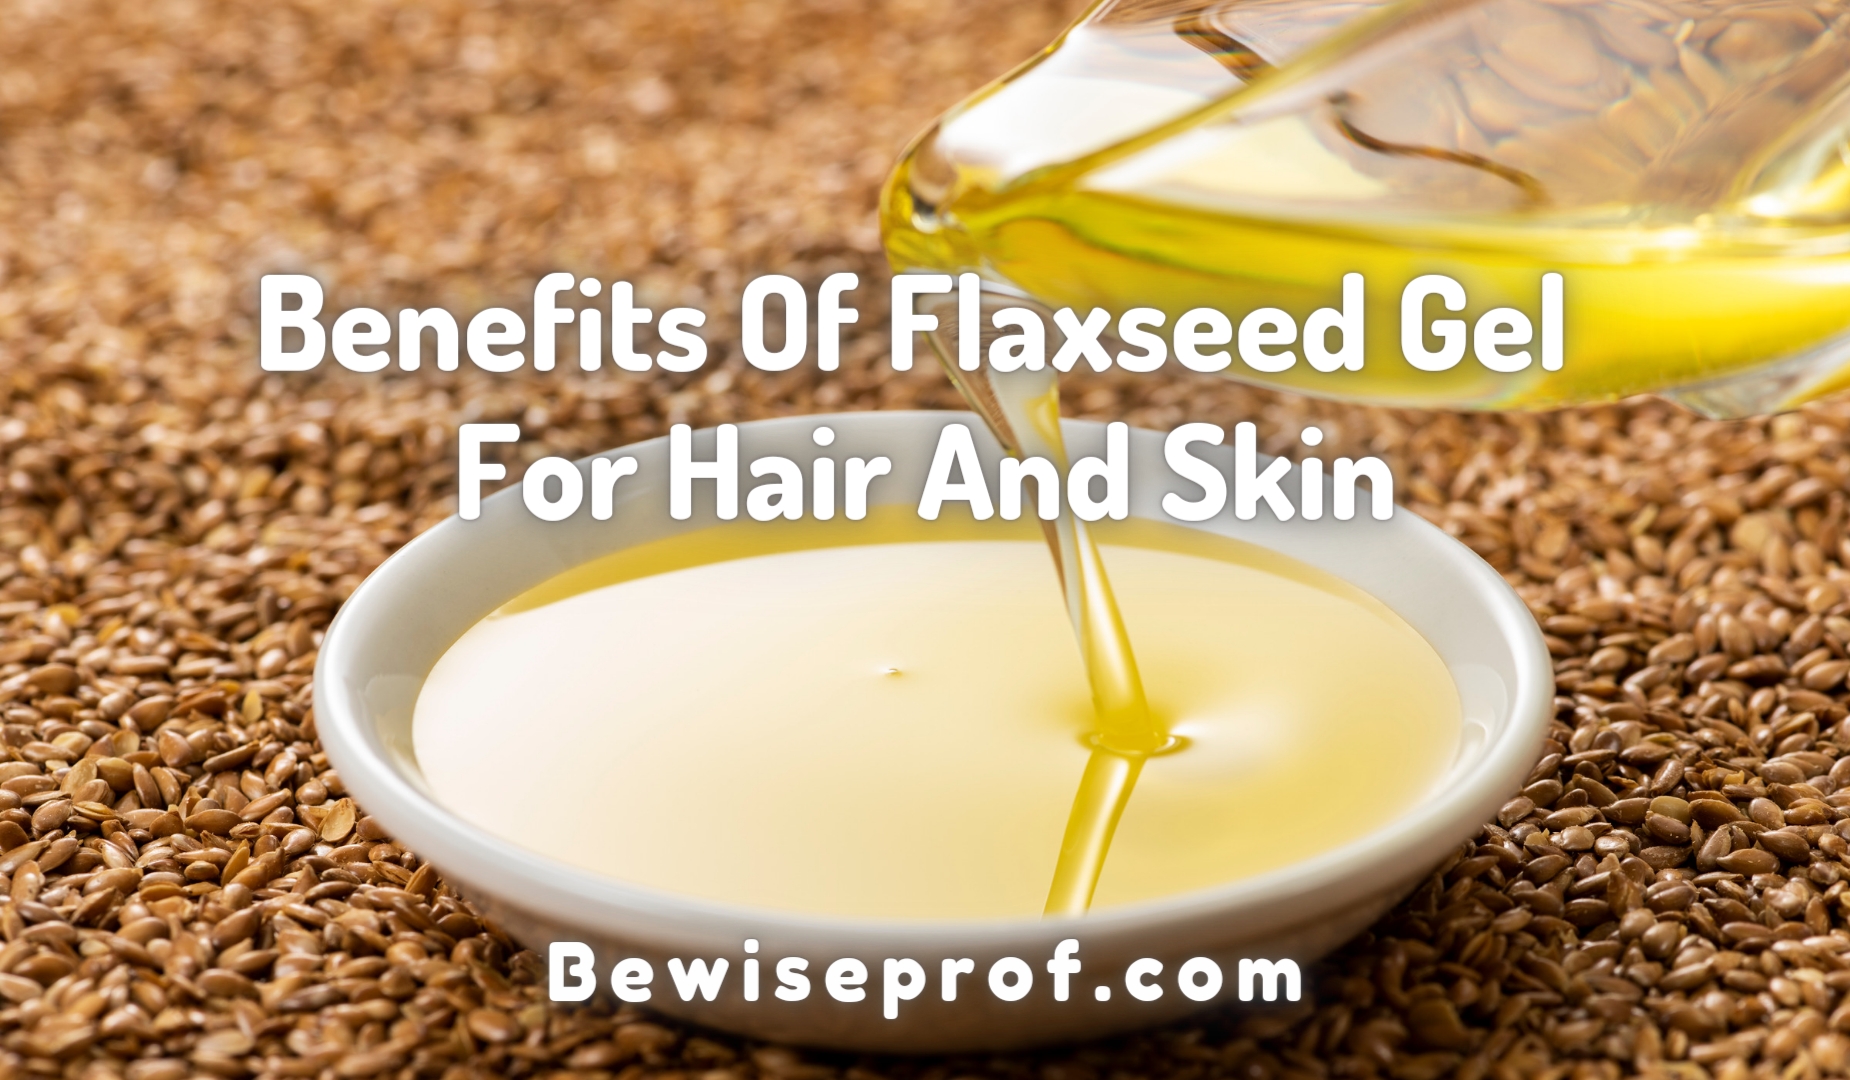 Benefits Of Flaxseed Gel For Hair And Skin